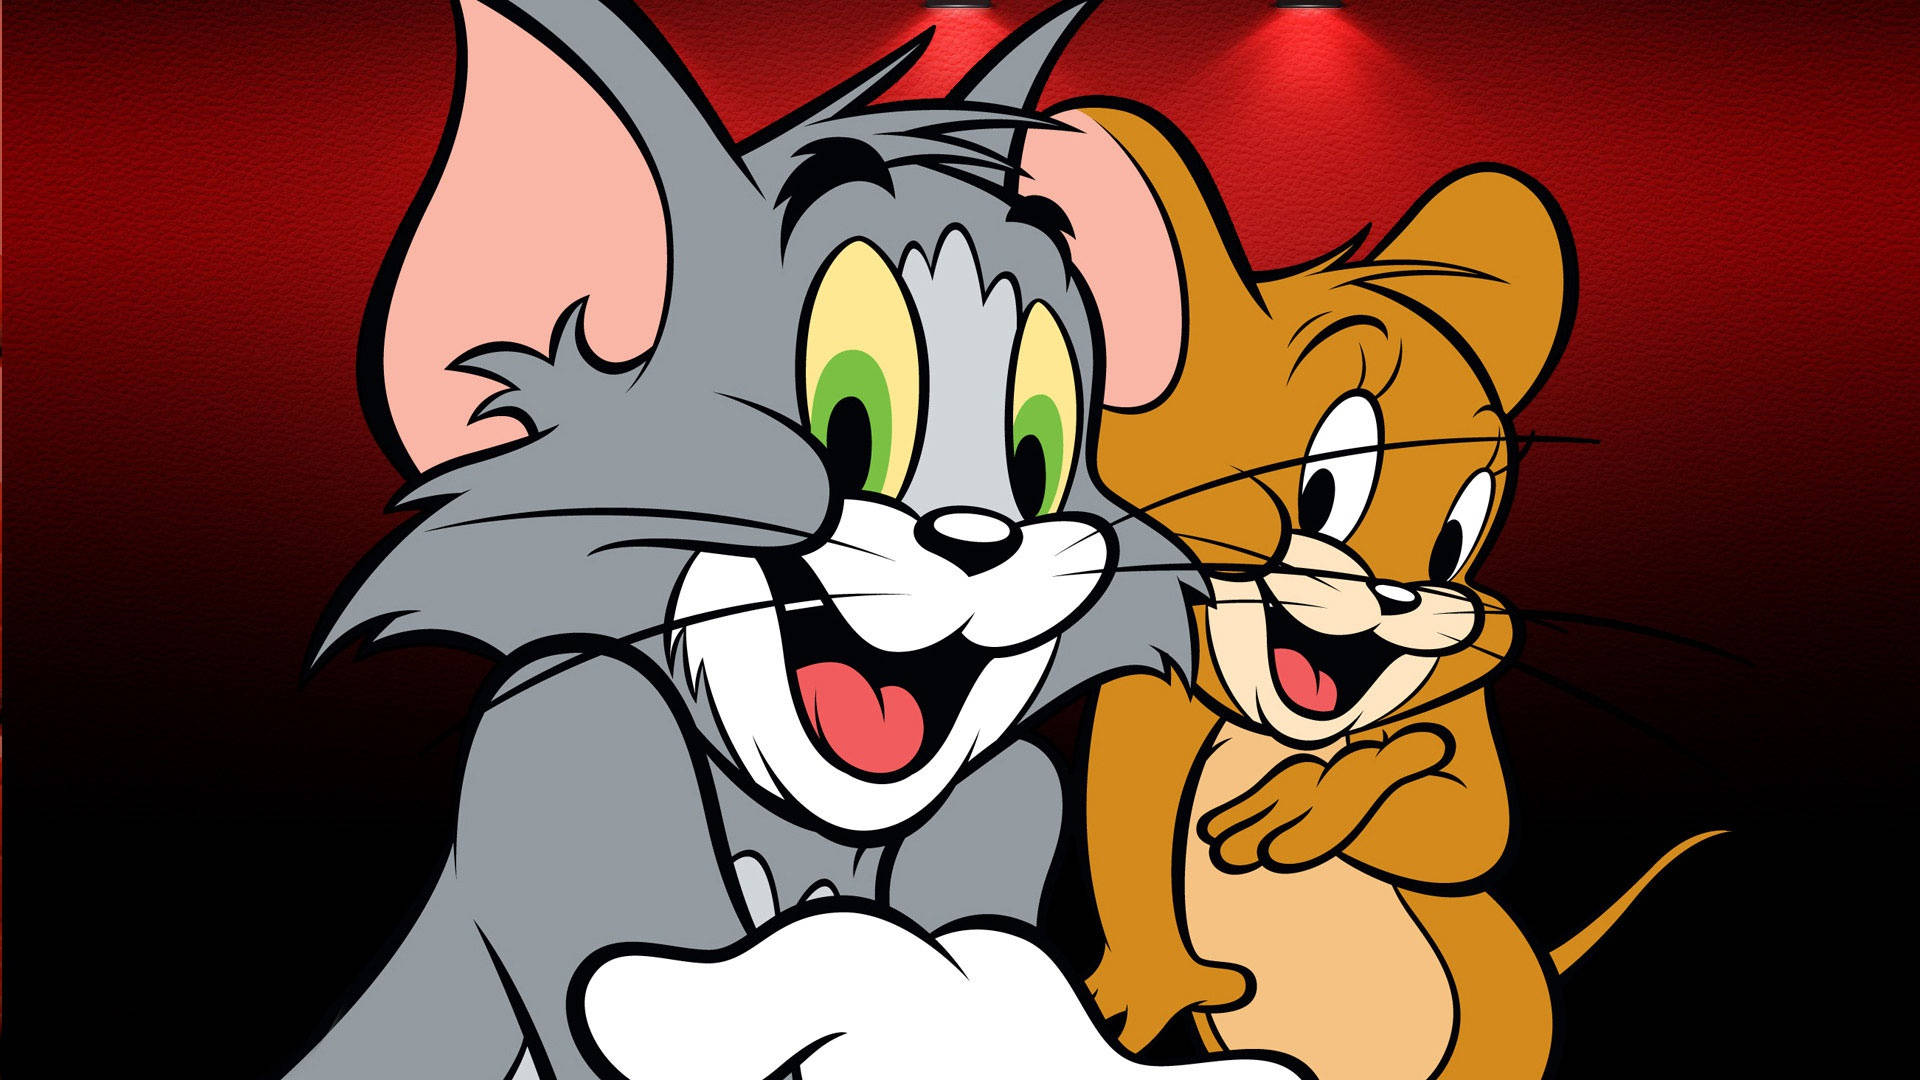 Tomund Jerry Iphone Rotes Abstrakt Wallpaper